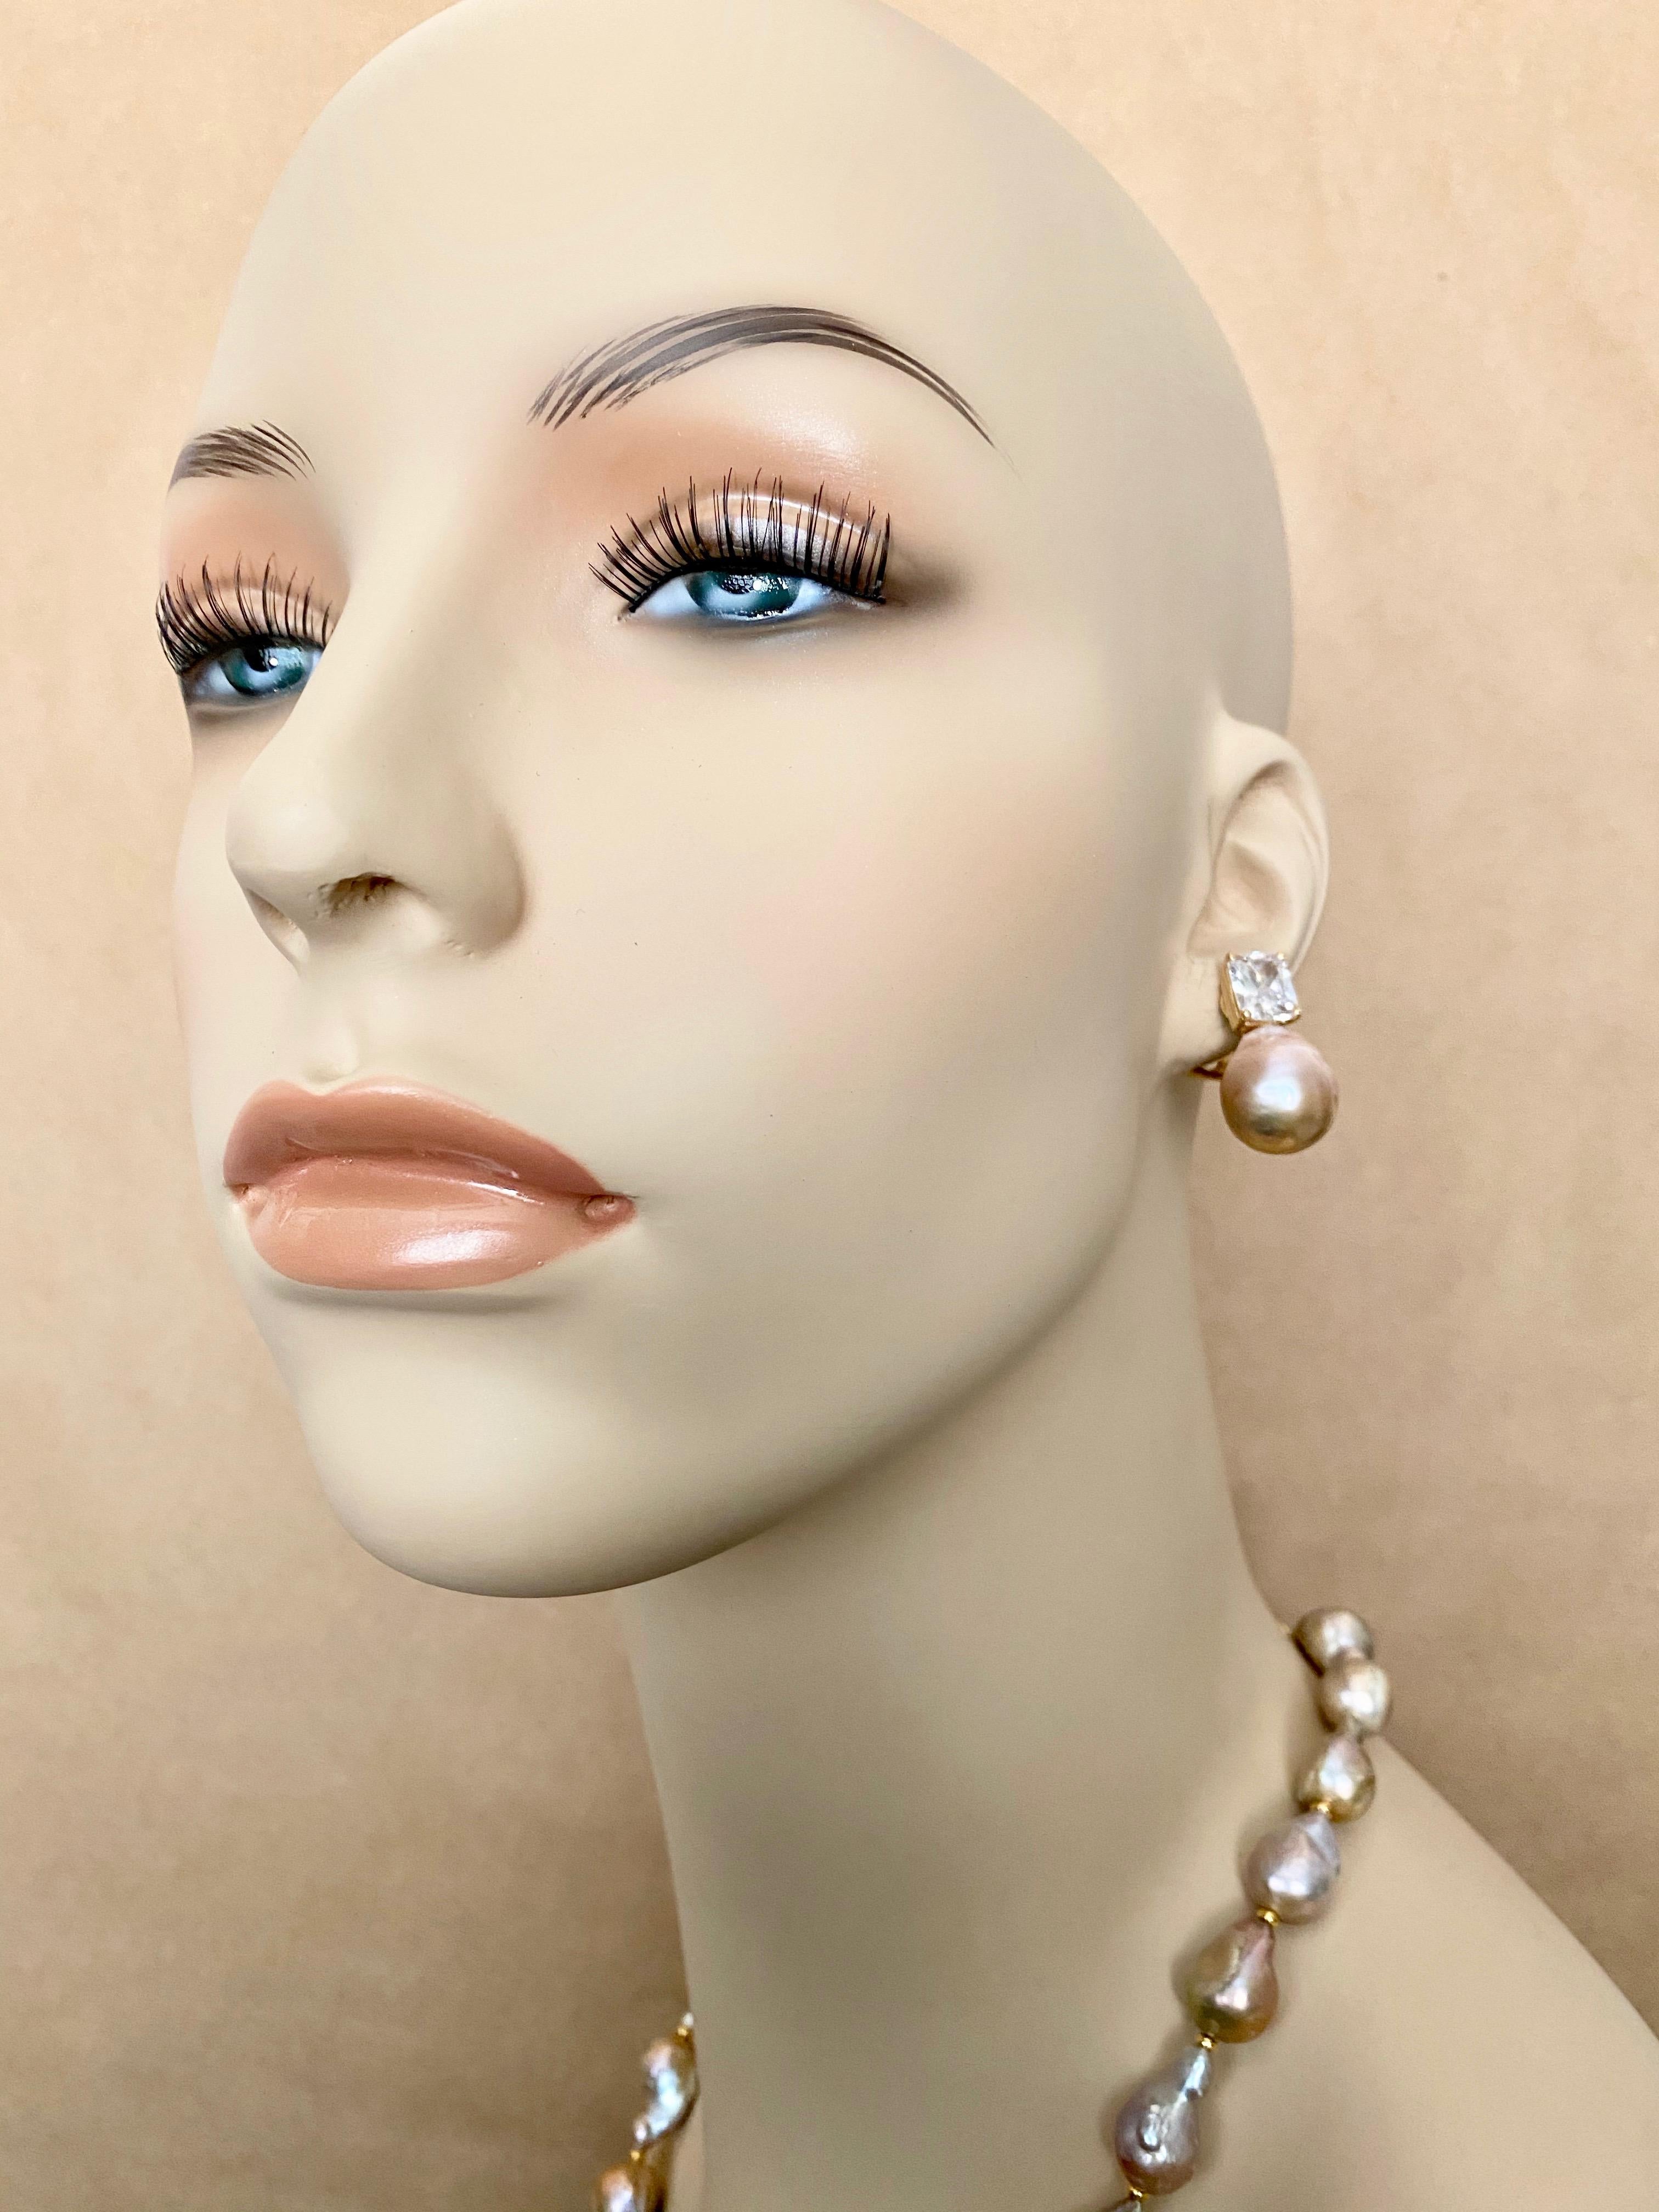 Flame Ball pearls (origin: China) comprise this pearl necklace paired with matching pearl and silver sapphire earring to form this chic suite.  The pearls are gray in color with rose tones.  They are very baroque in shape and have beautiful luster. 